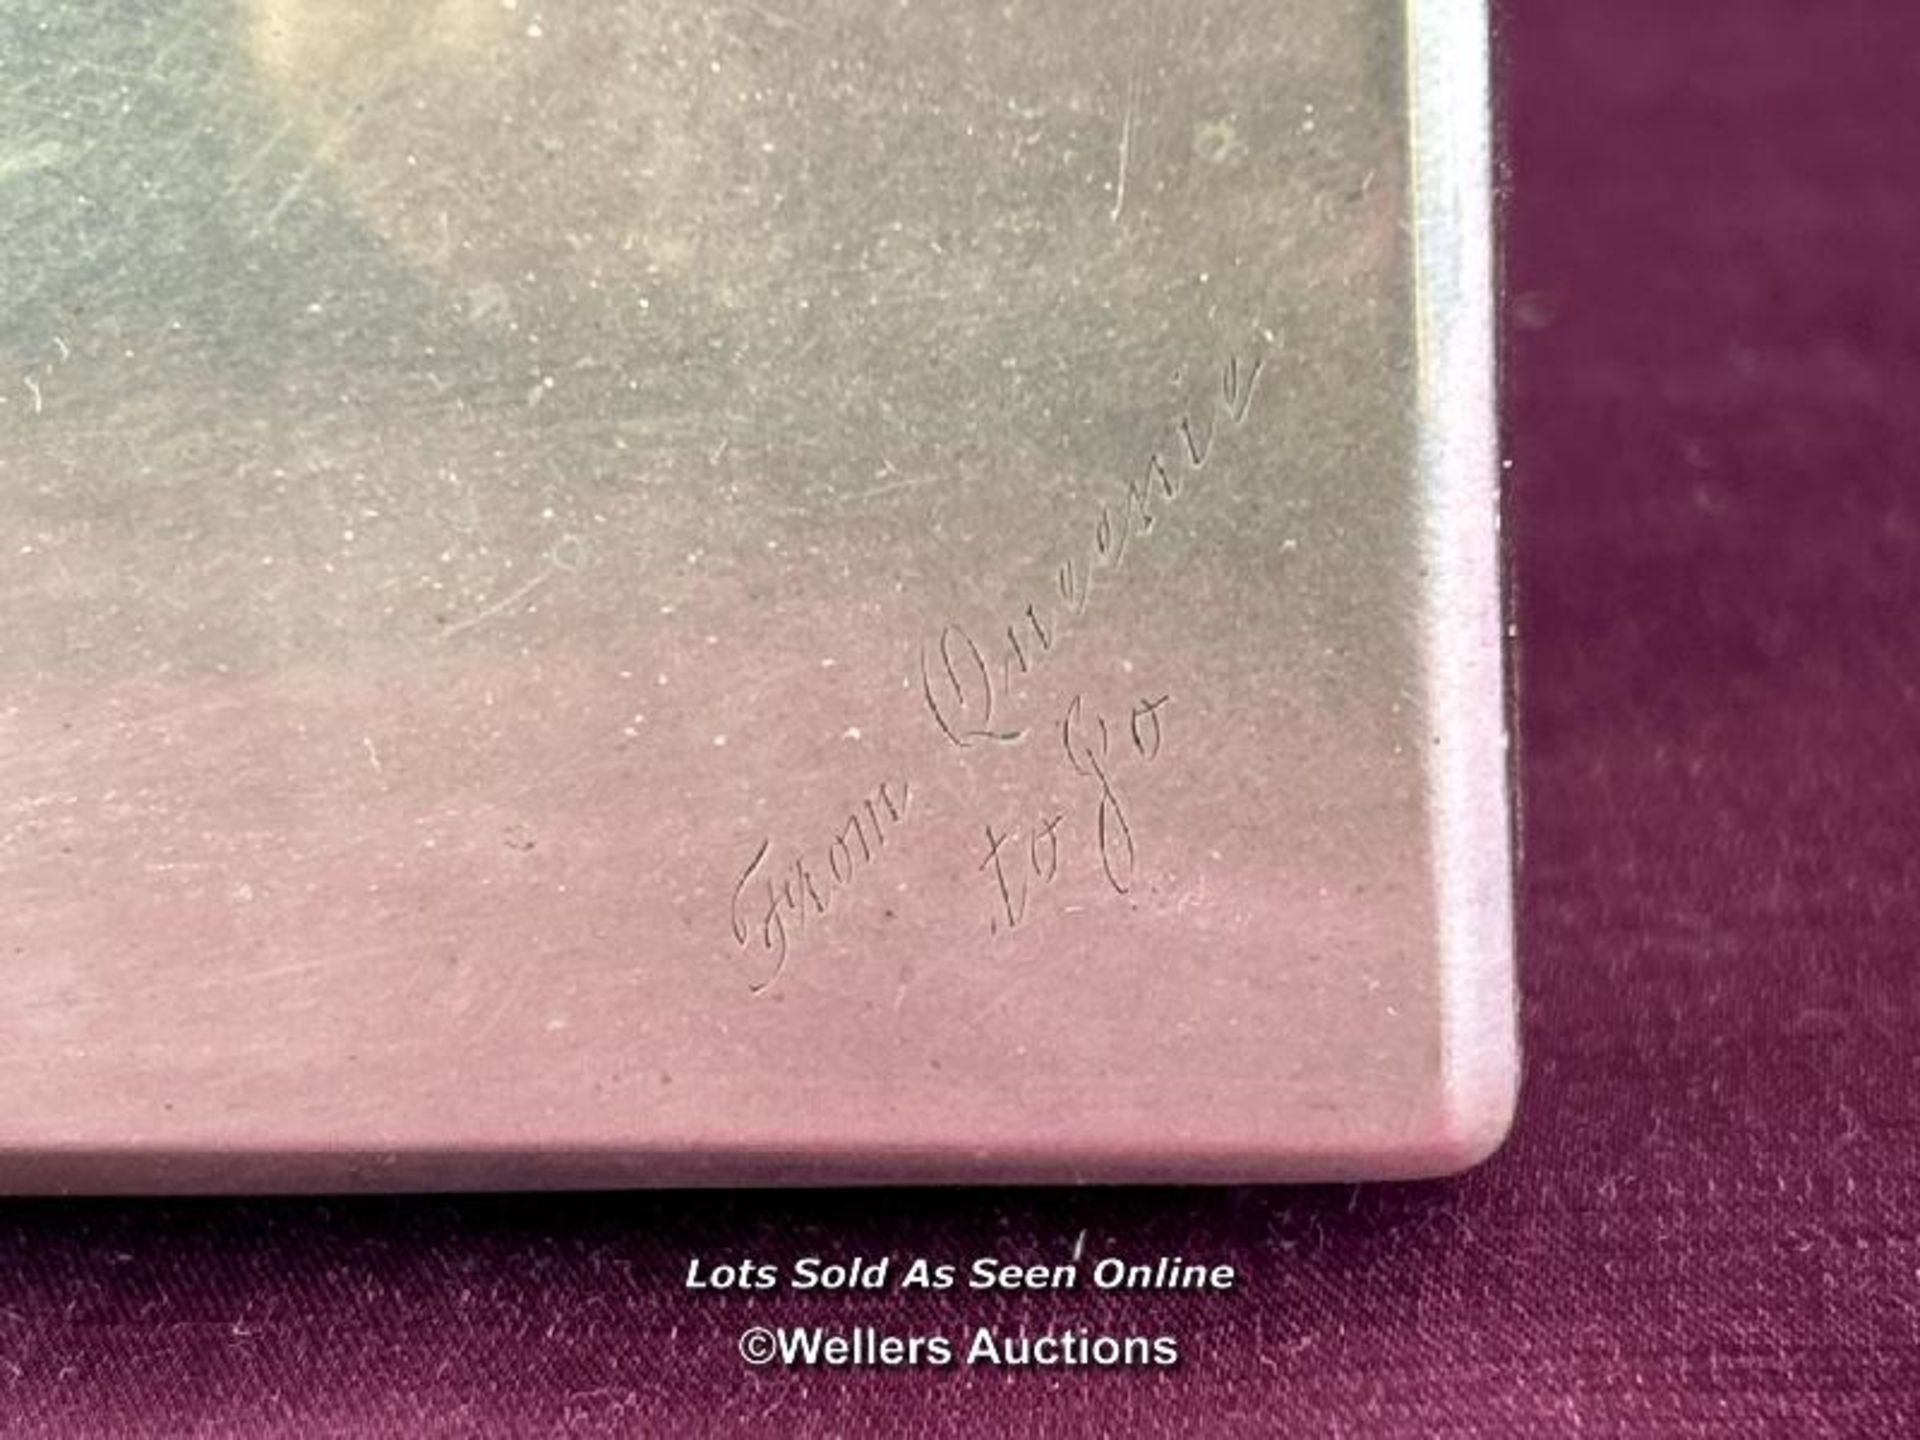 WHITE METAL AND WOODEN TRINKET BOX WITH INSCRIPTION 'FROM QUEENIE TO JO', DATED 13/04/48, 16.5 X 9 X - Image 4 of 4